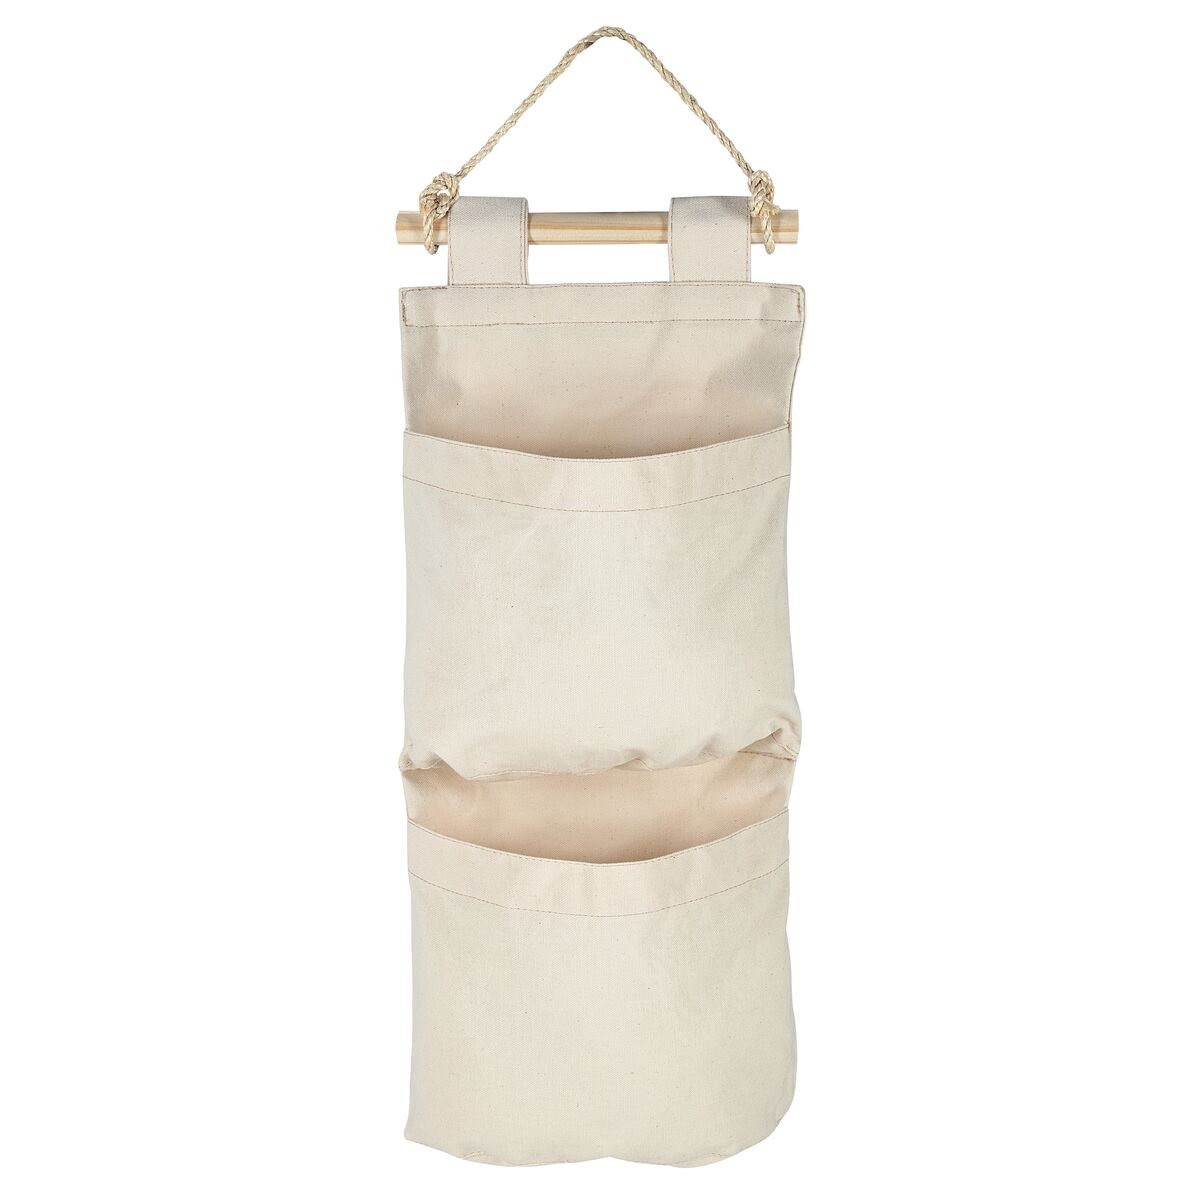 
Tramontina Organizer in Natural Canvas with 2 Pockets and Rope for Hanging
